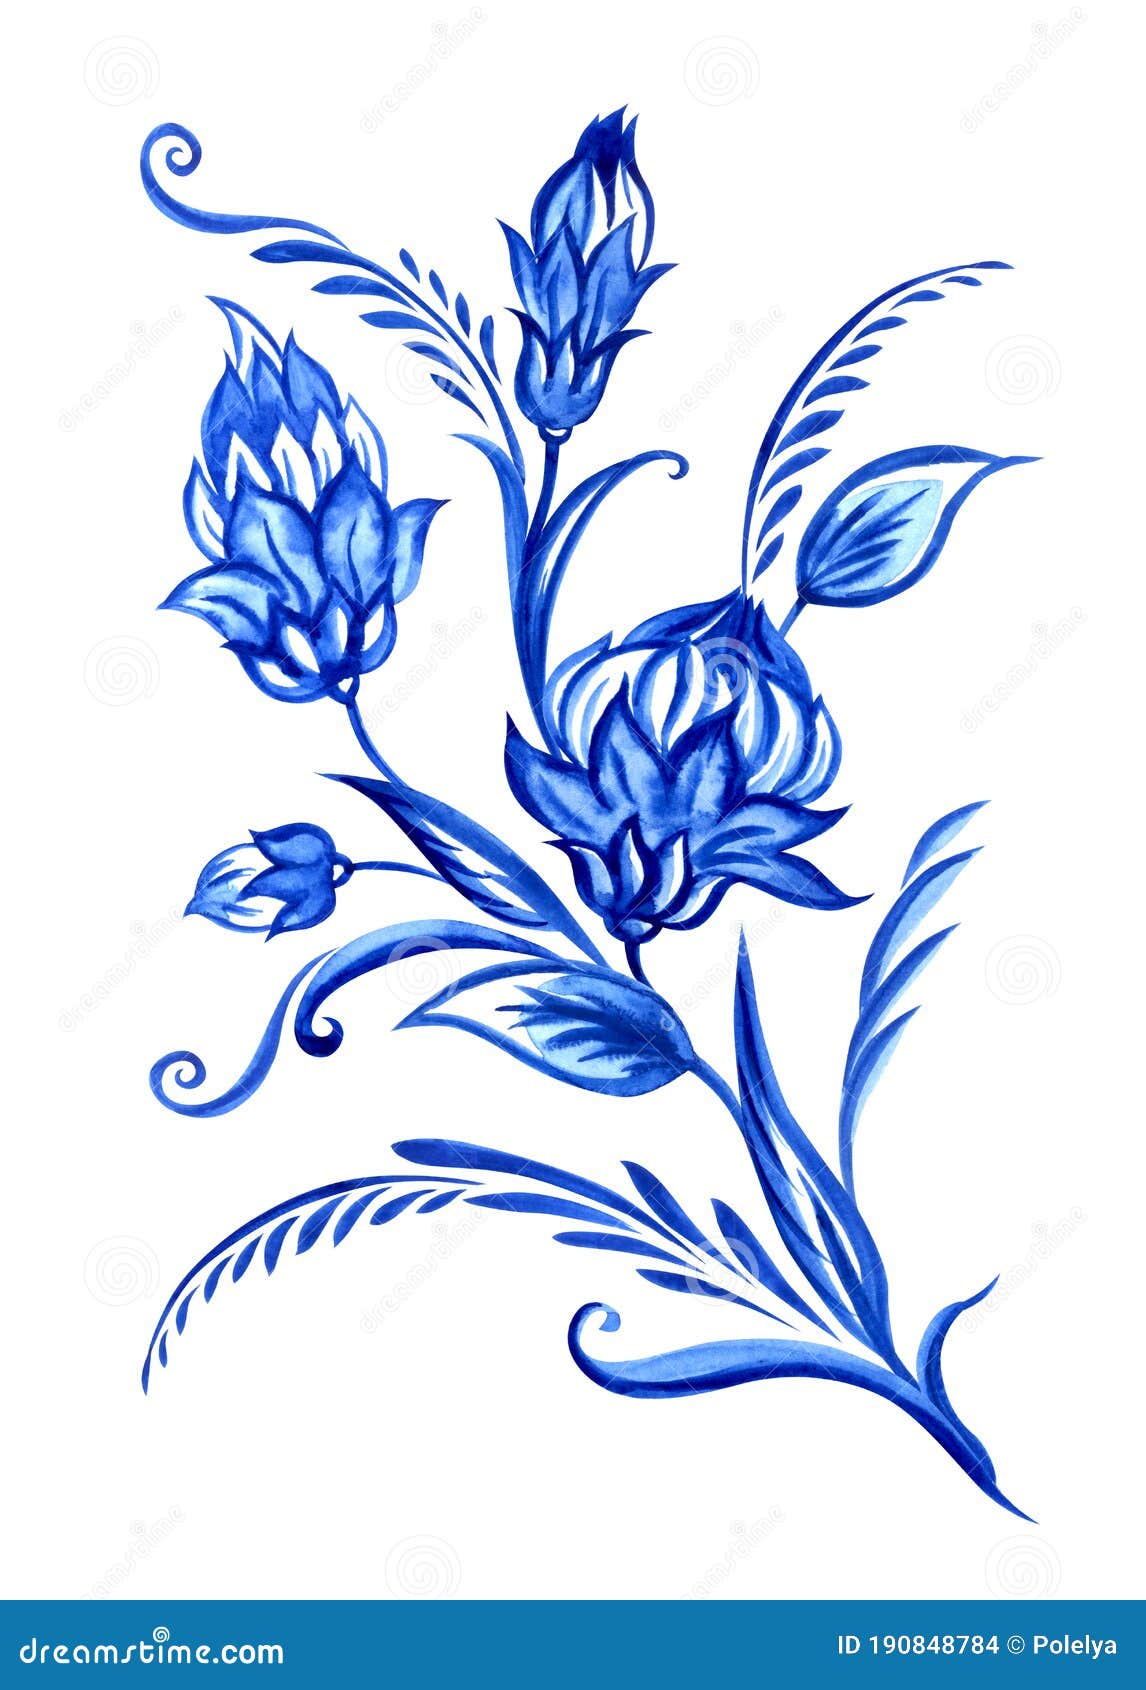 Floral Bouquet Art Print Illustration  Flowers Branches Blue and White China Vase Delft Painting Indigo Navy White Wall Decor